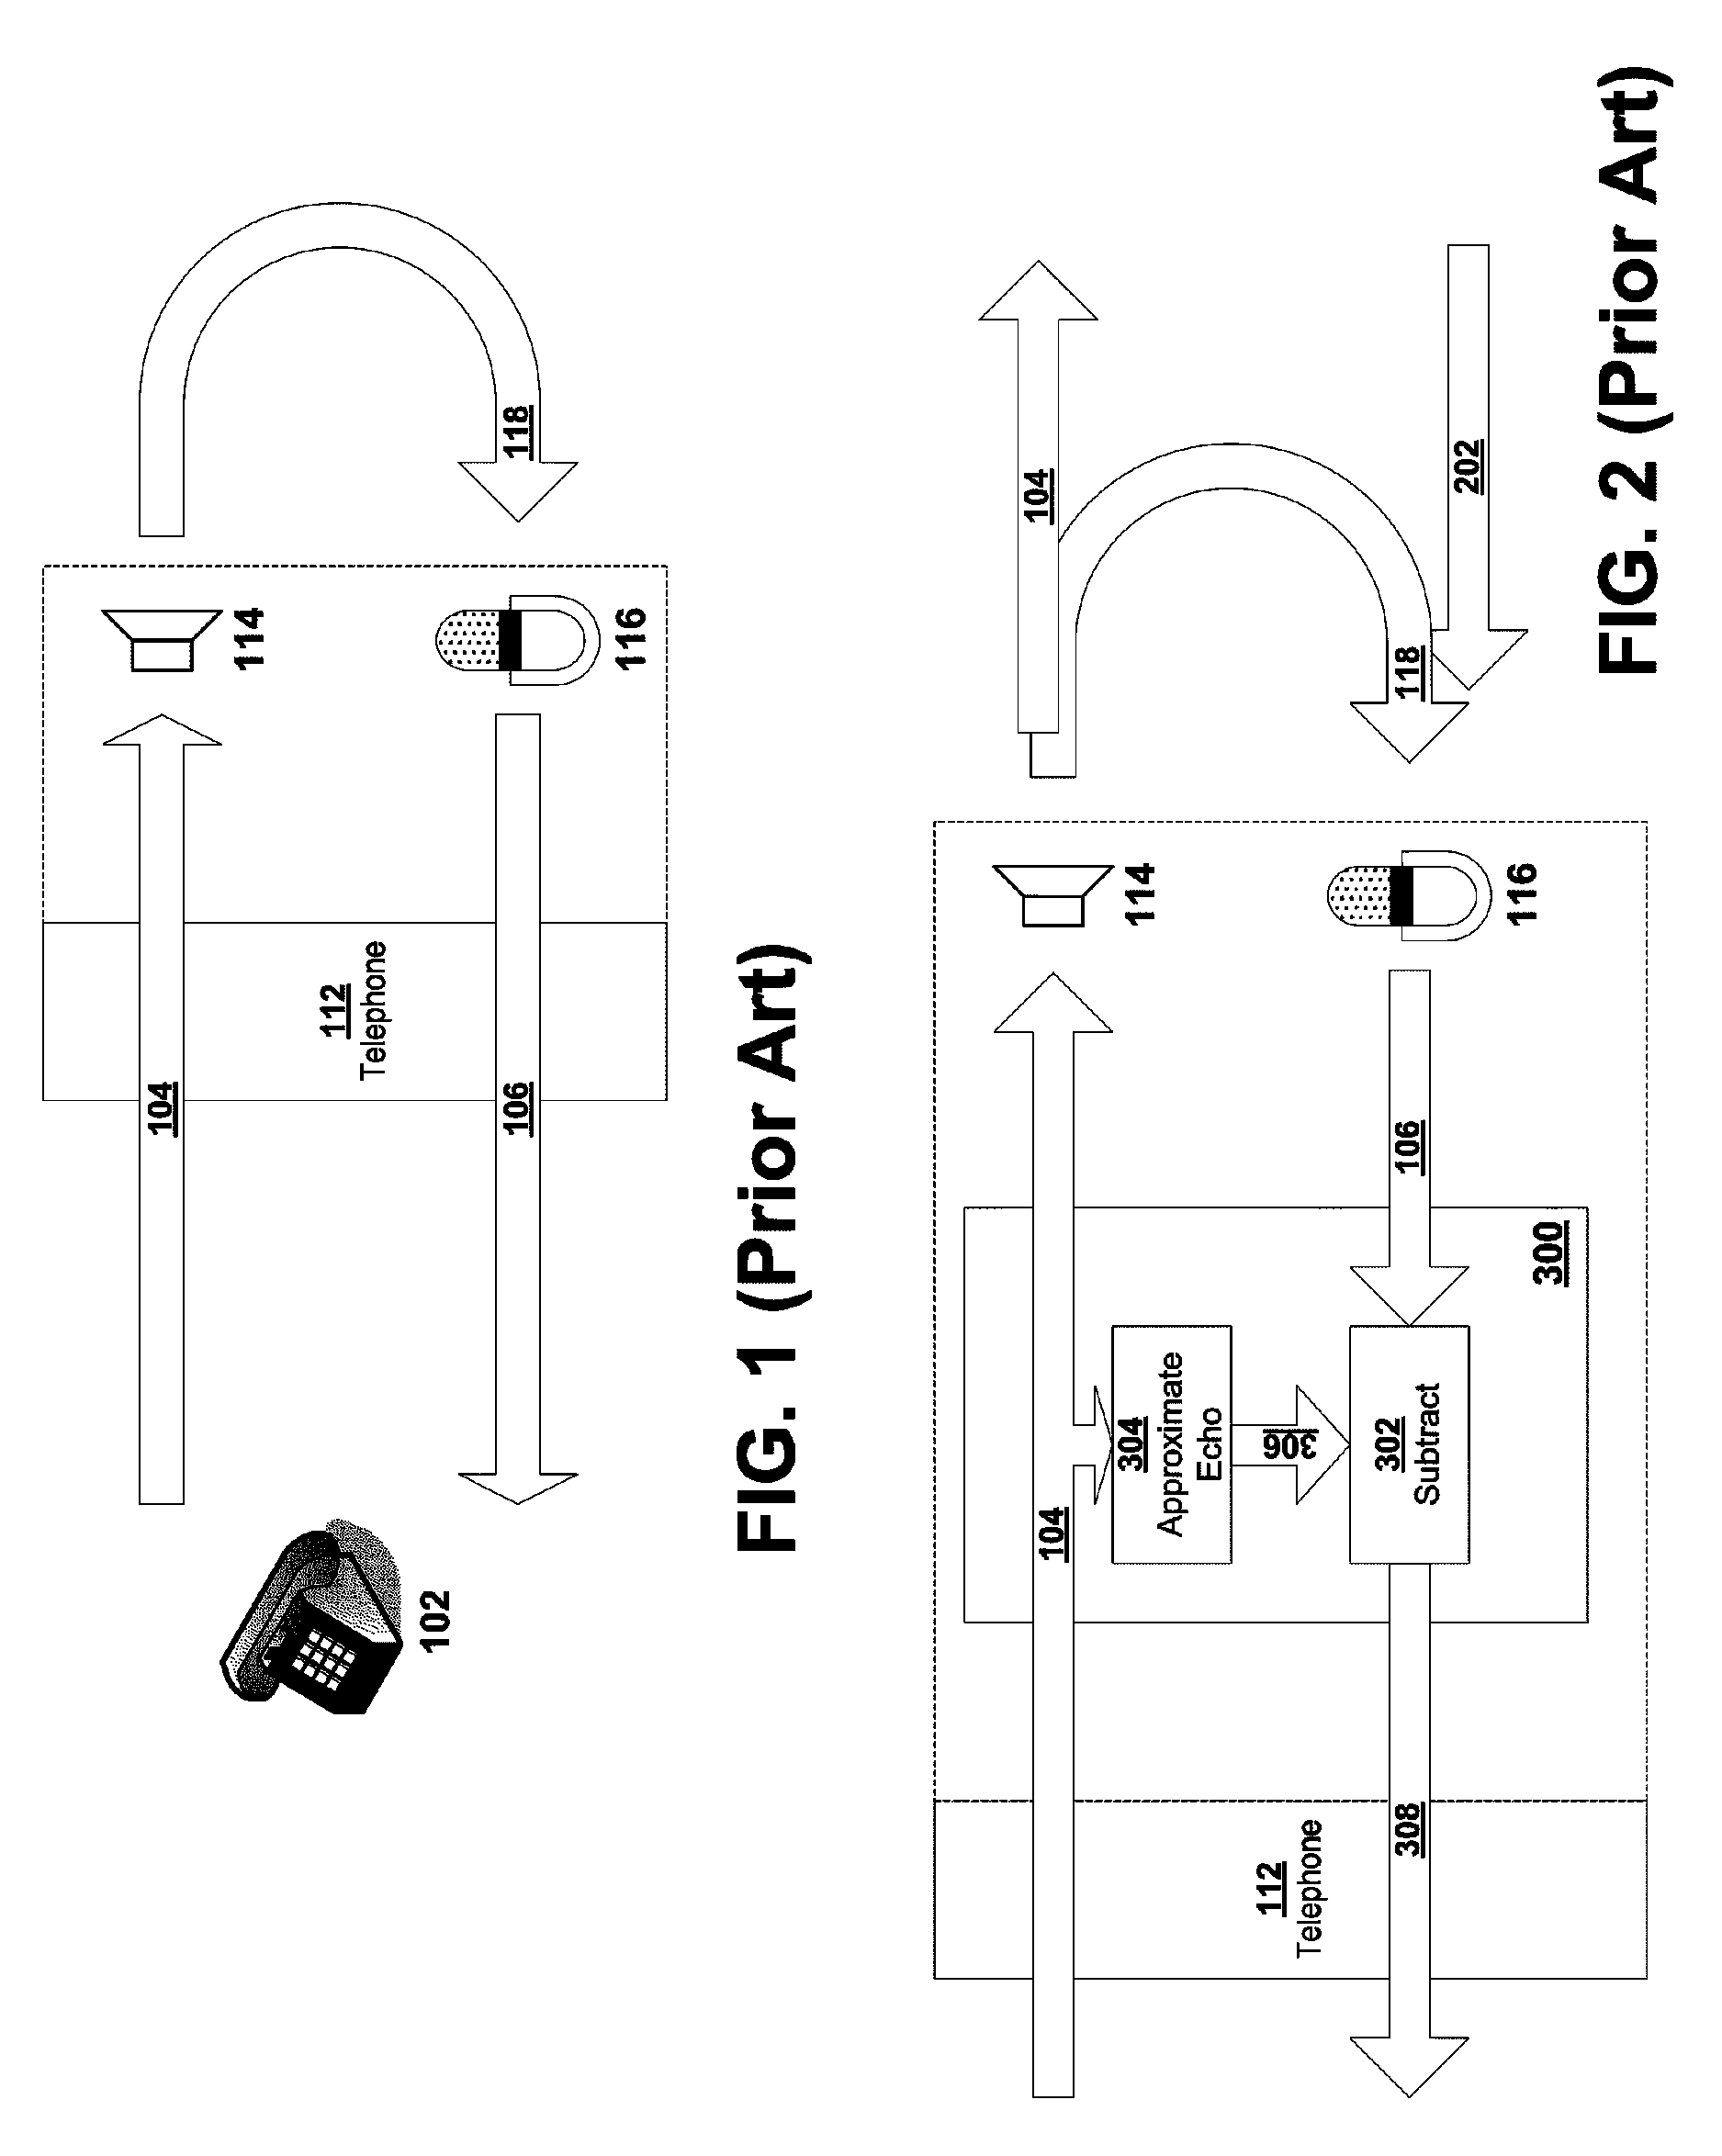 Systems and methods for echo cancellation and echo suppression